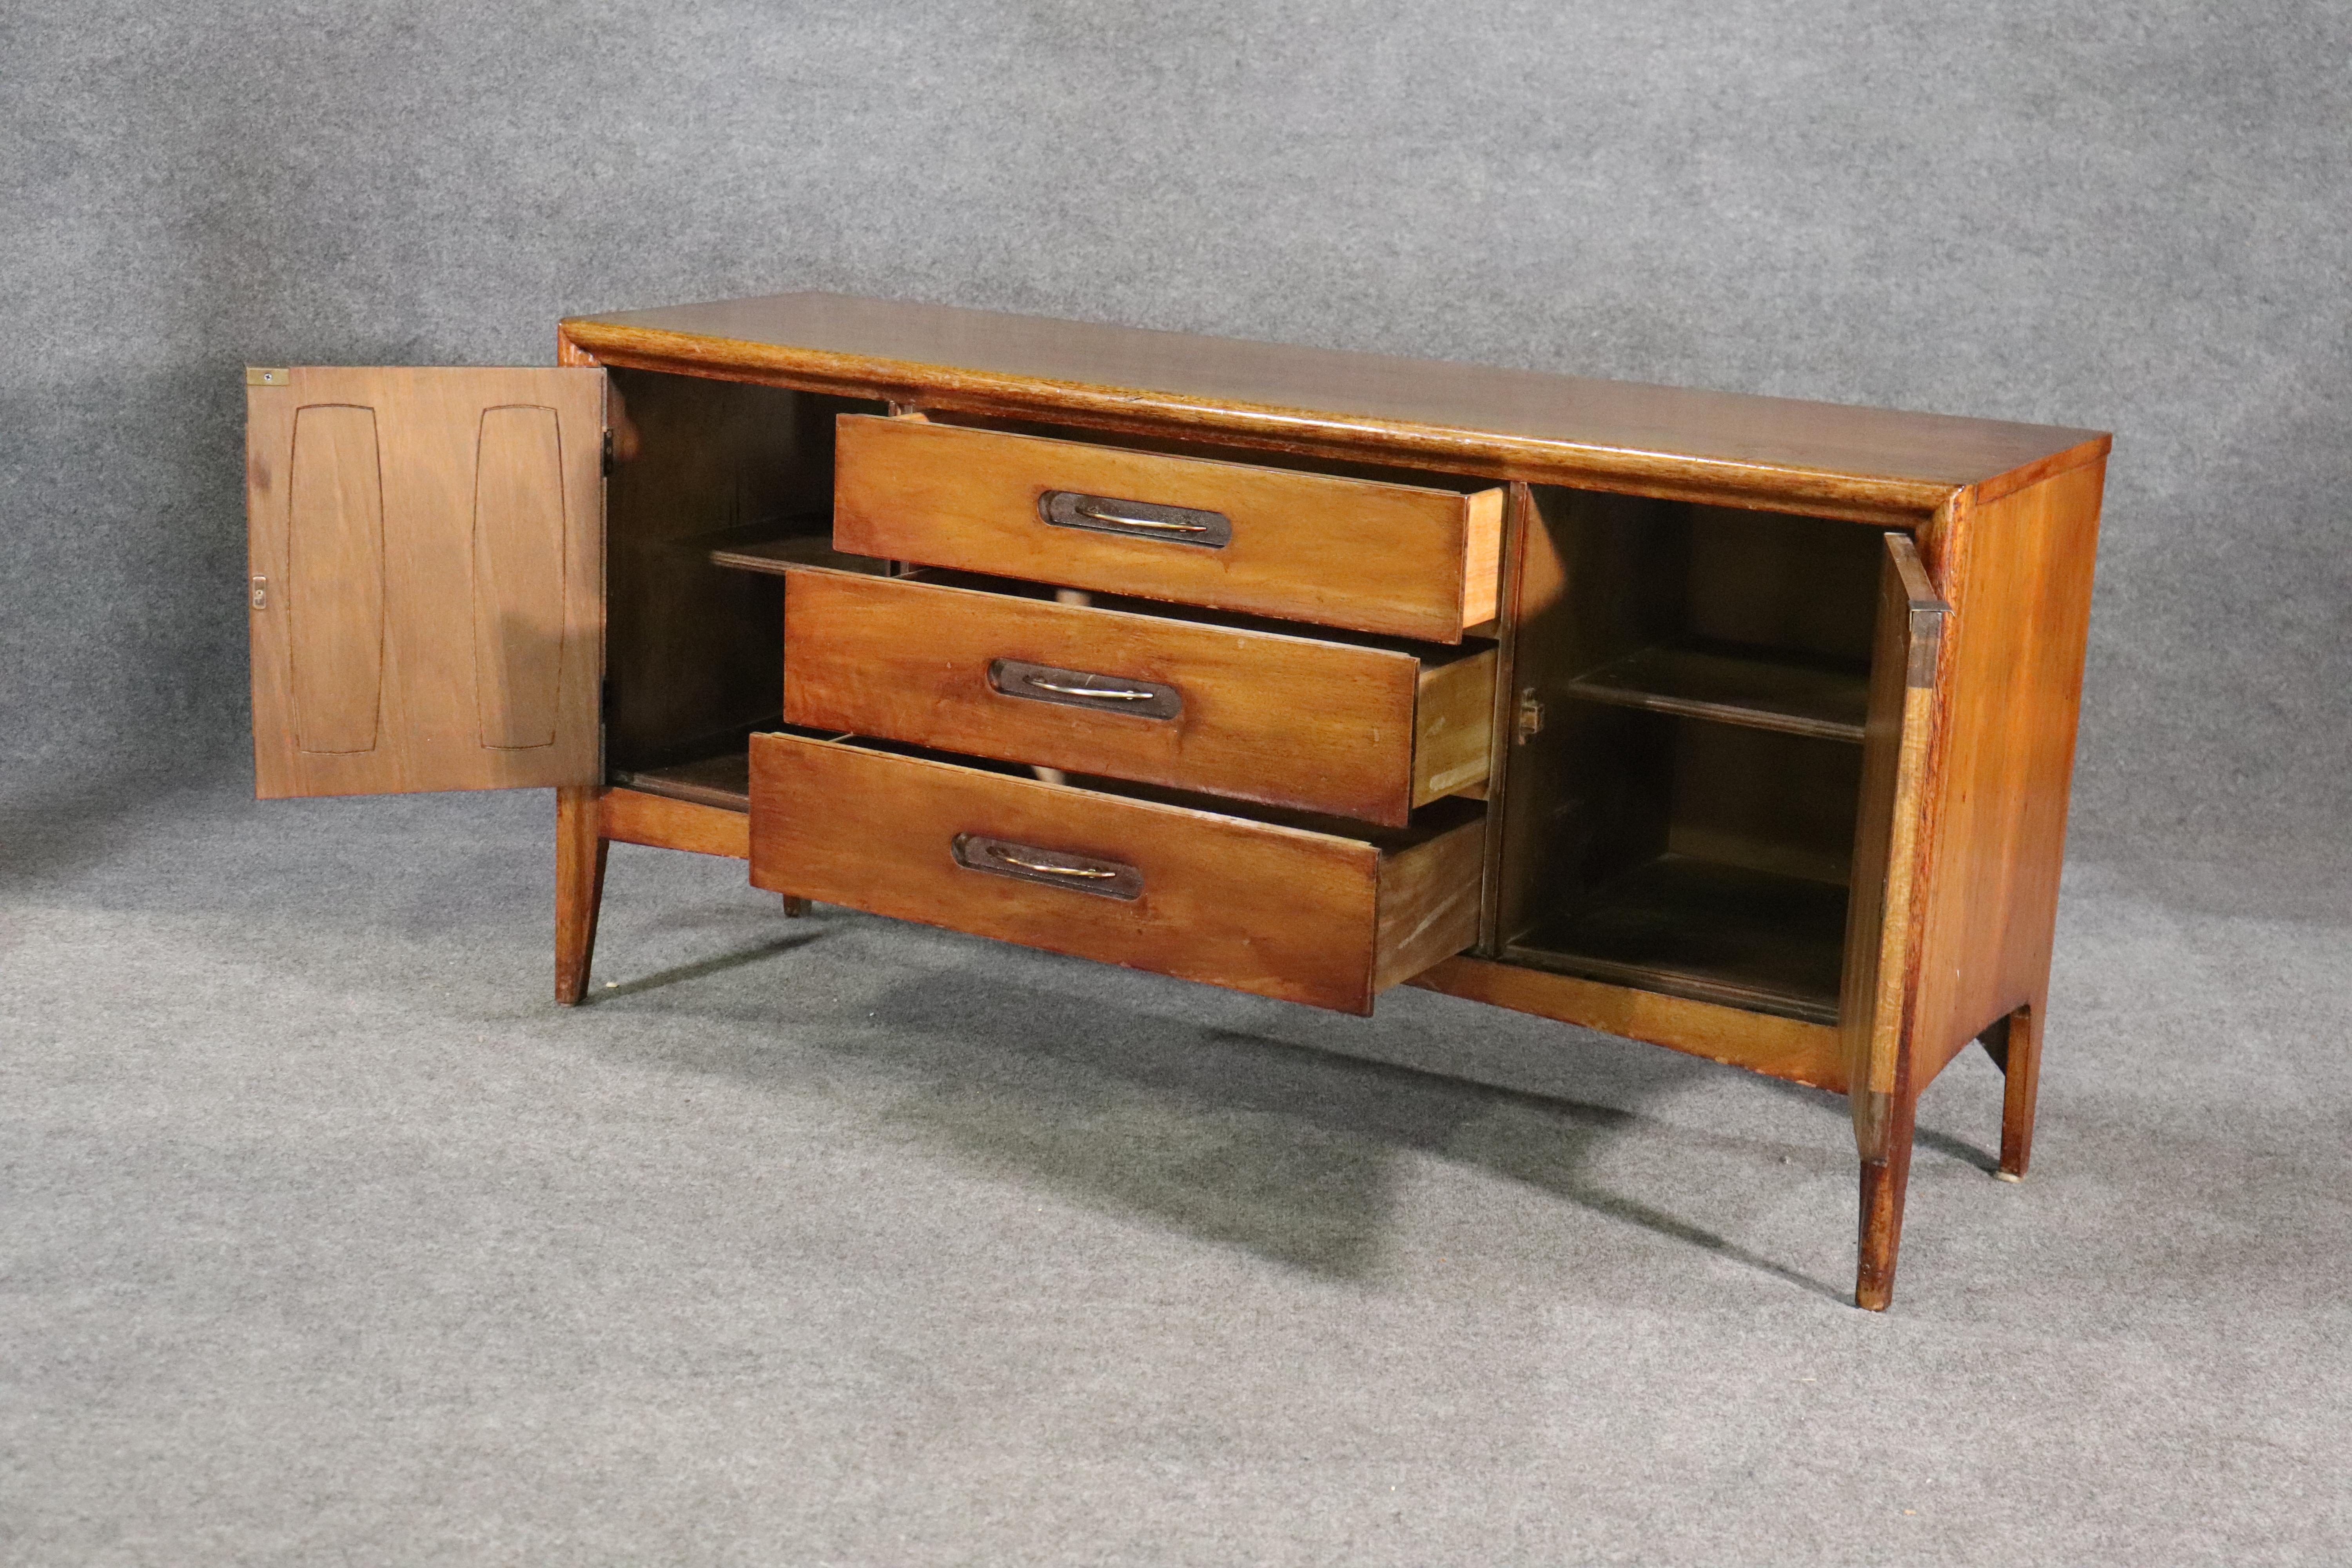 Mid-century modern American made dresser by Broyhill. This dresser or buffet has three wide drawers and two side cabinets.
Please confirm location NY or NJ